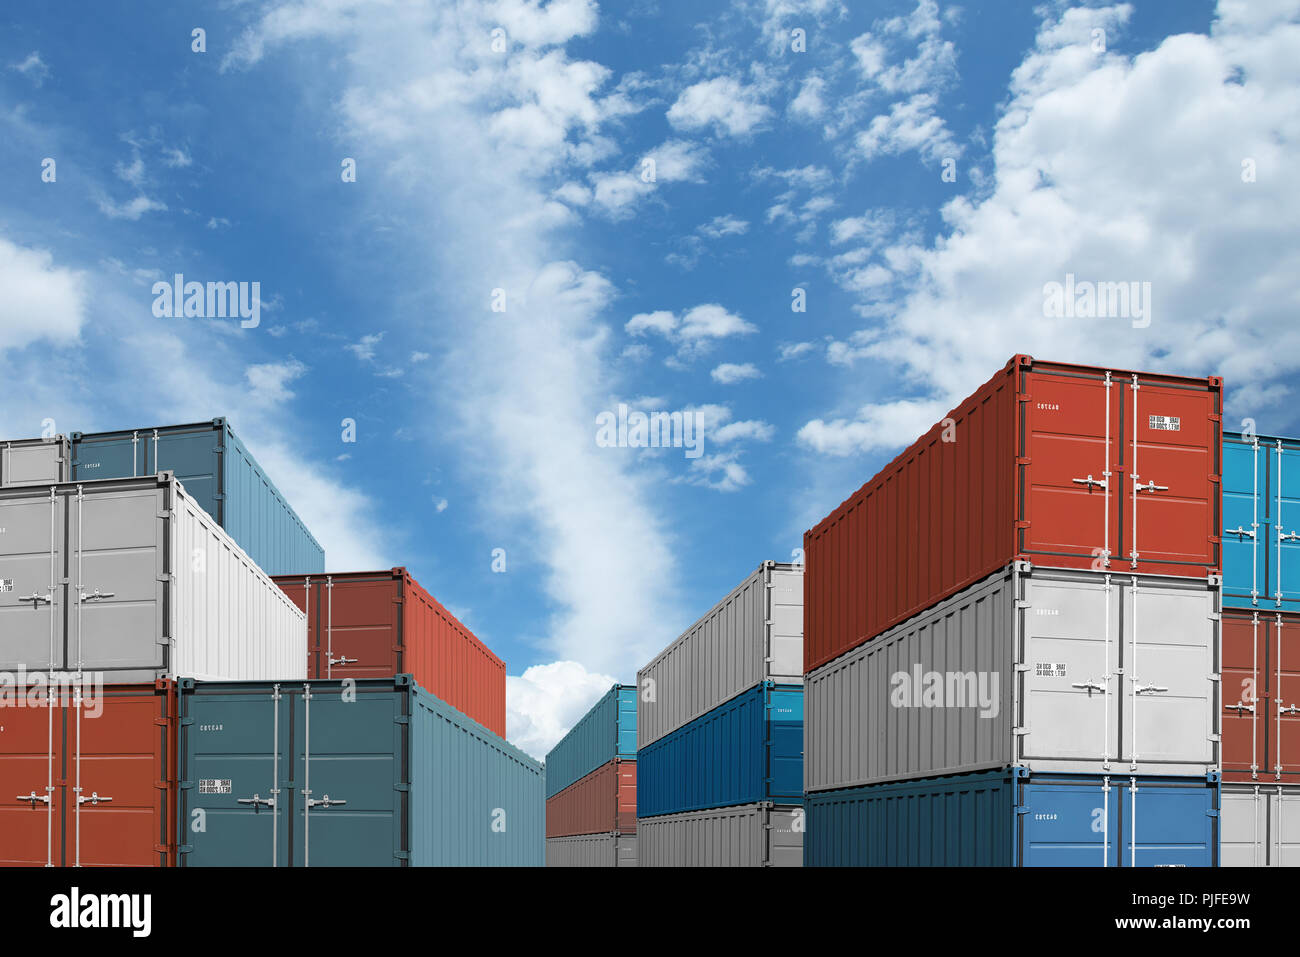 export or import shipping cargo containers stacks under sky Stock Photo